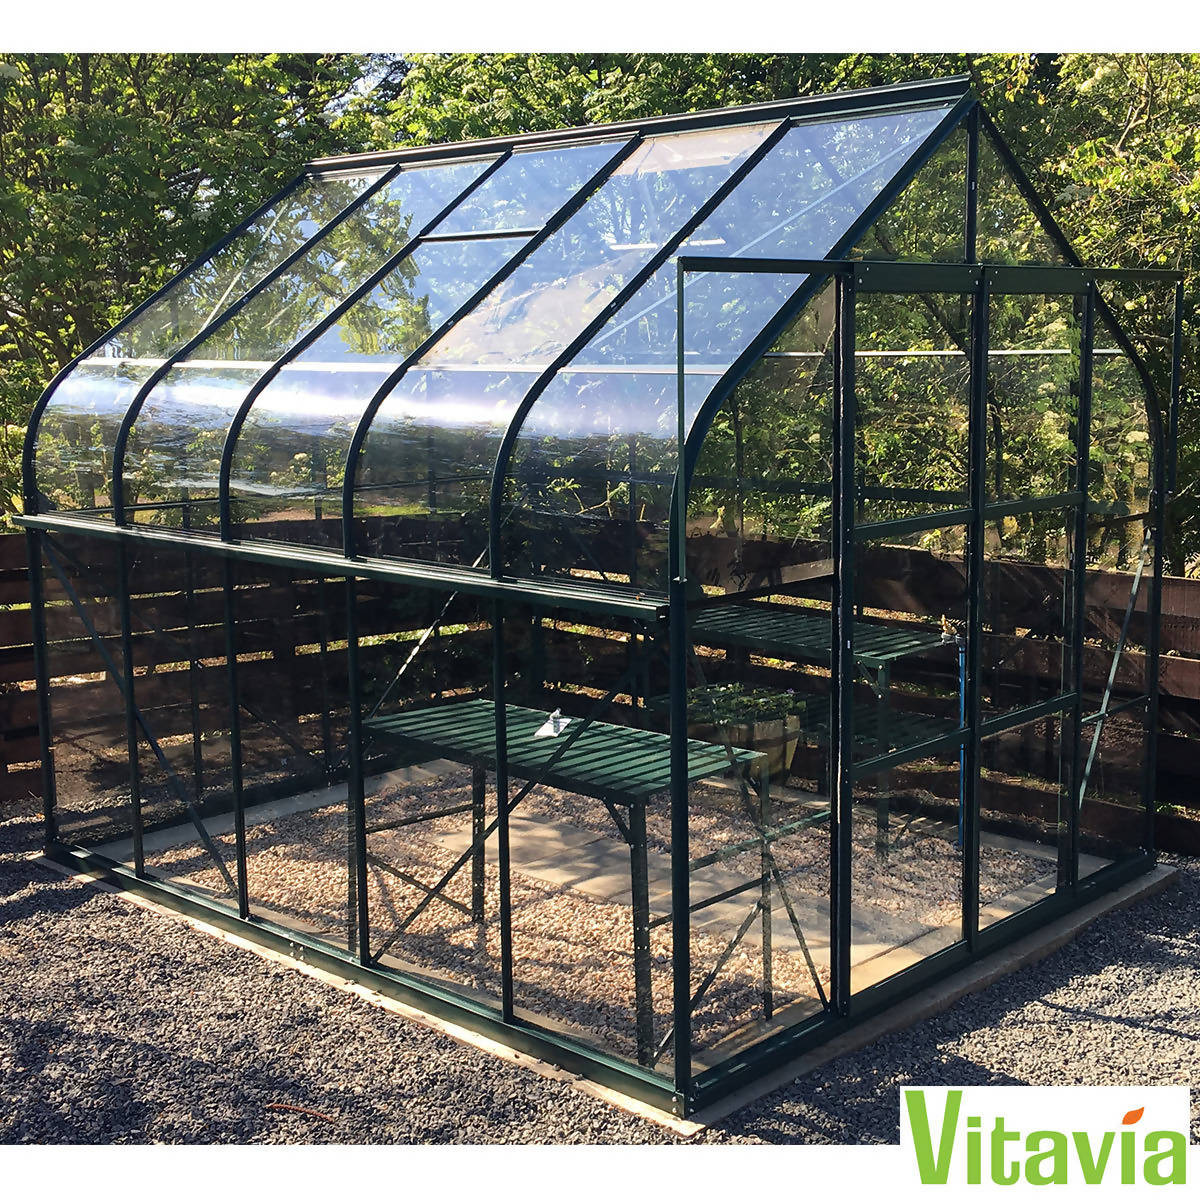 Vitavia Colorado 8300 8ft 4" x 10ft 6" (2.6 x 3.2 m) Greenhouse Package - McGrocer